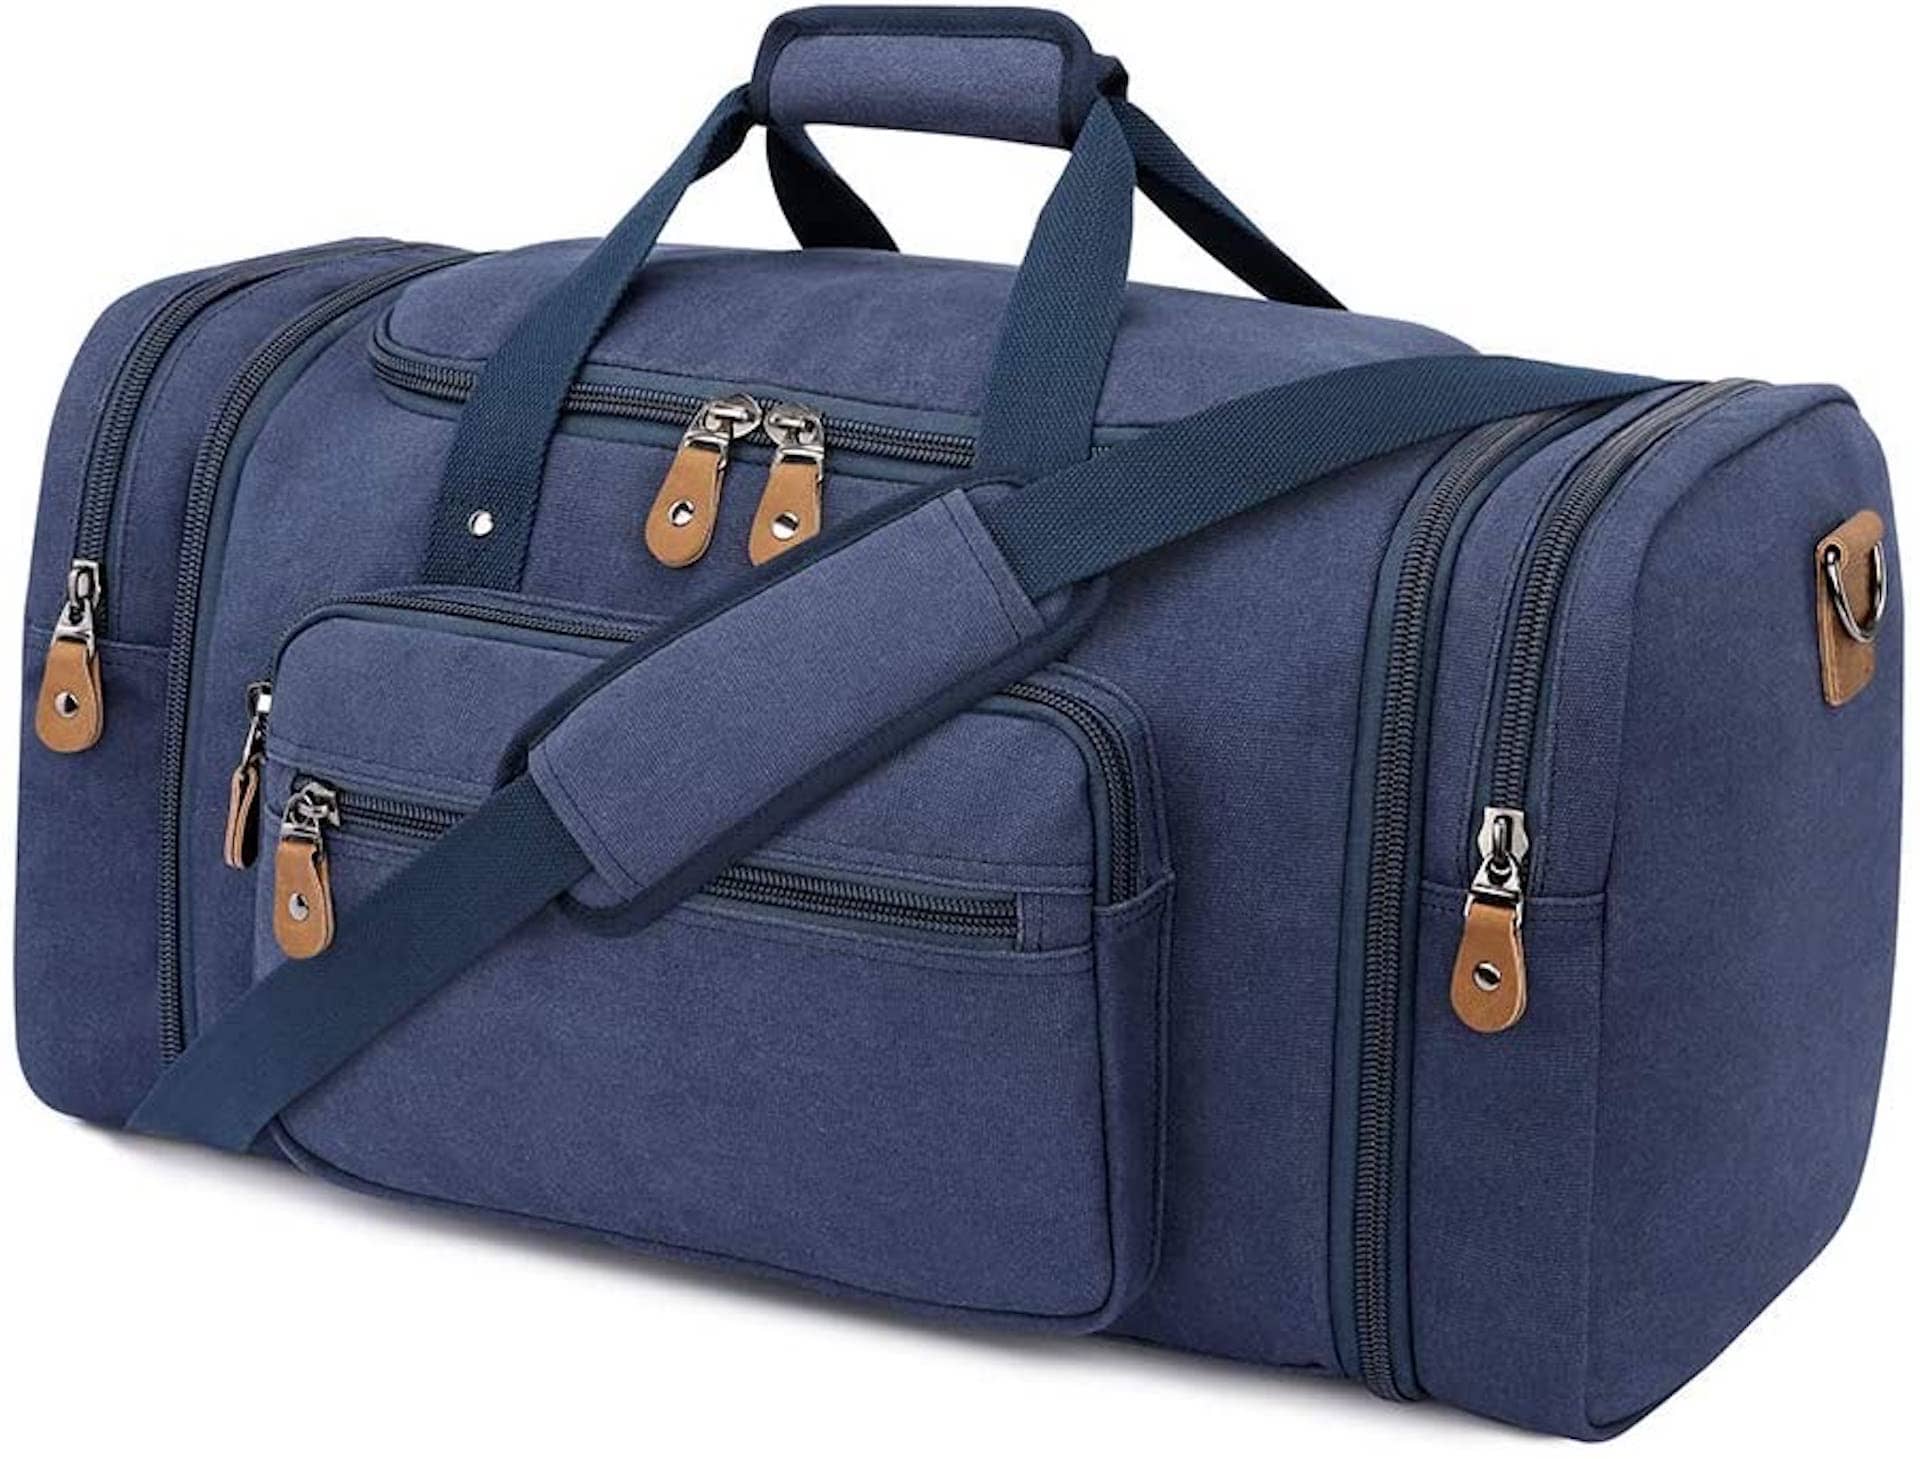 Is a Duffle Bag Considered a Carry On - Gonex Canvas Duffle Bag for Travel, 50L Duffel Overnight Weekend Bag - Sunny 16 Bags